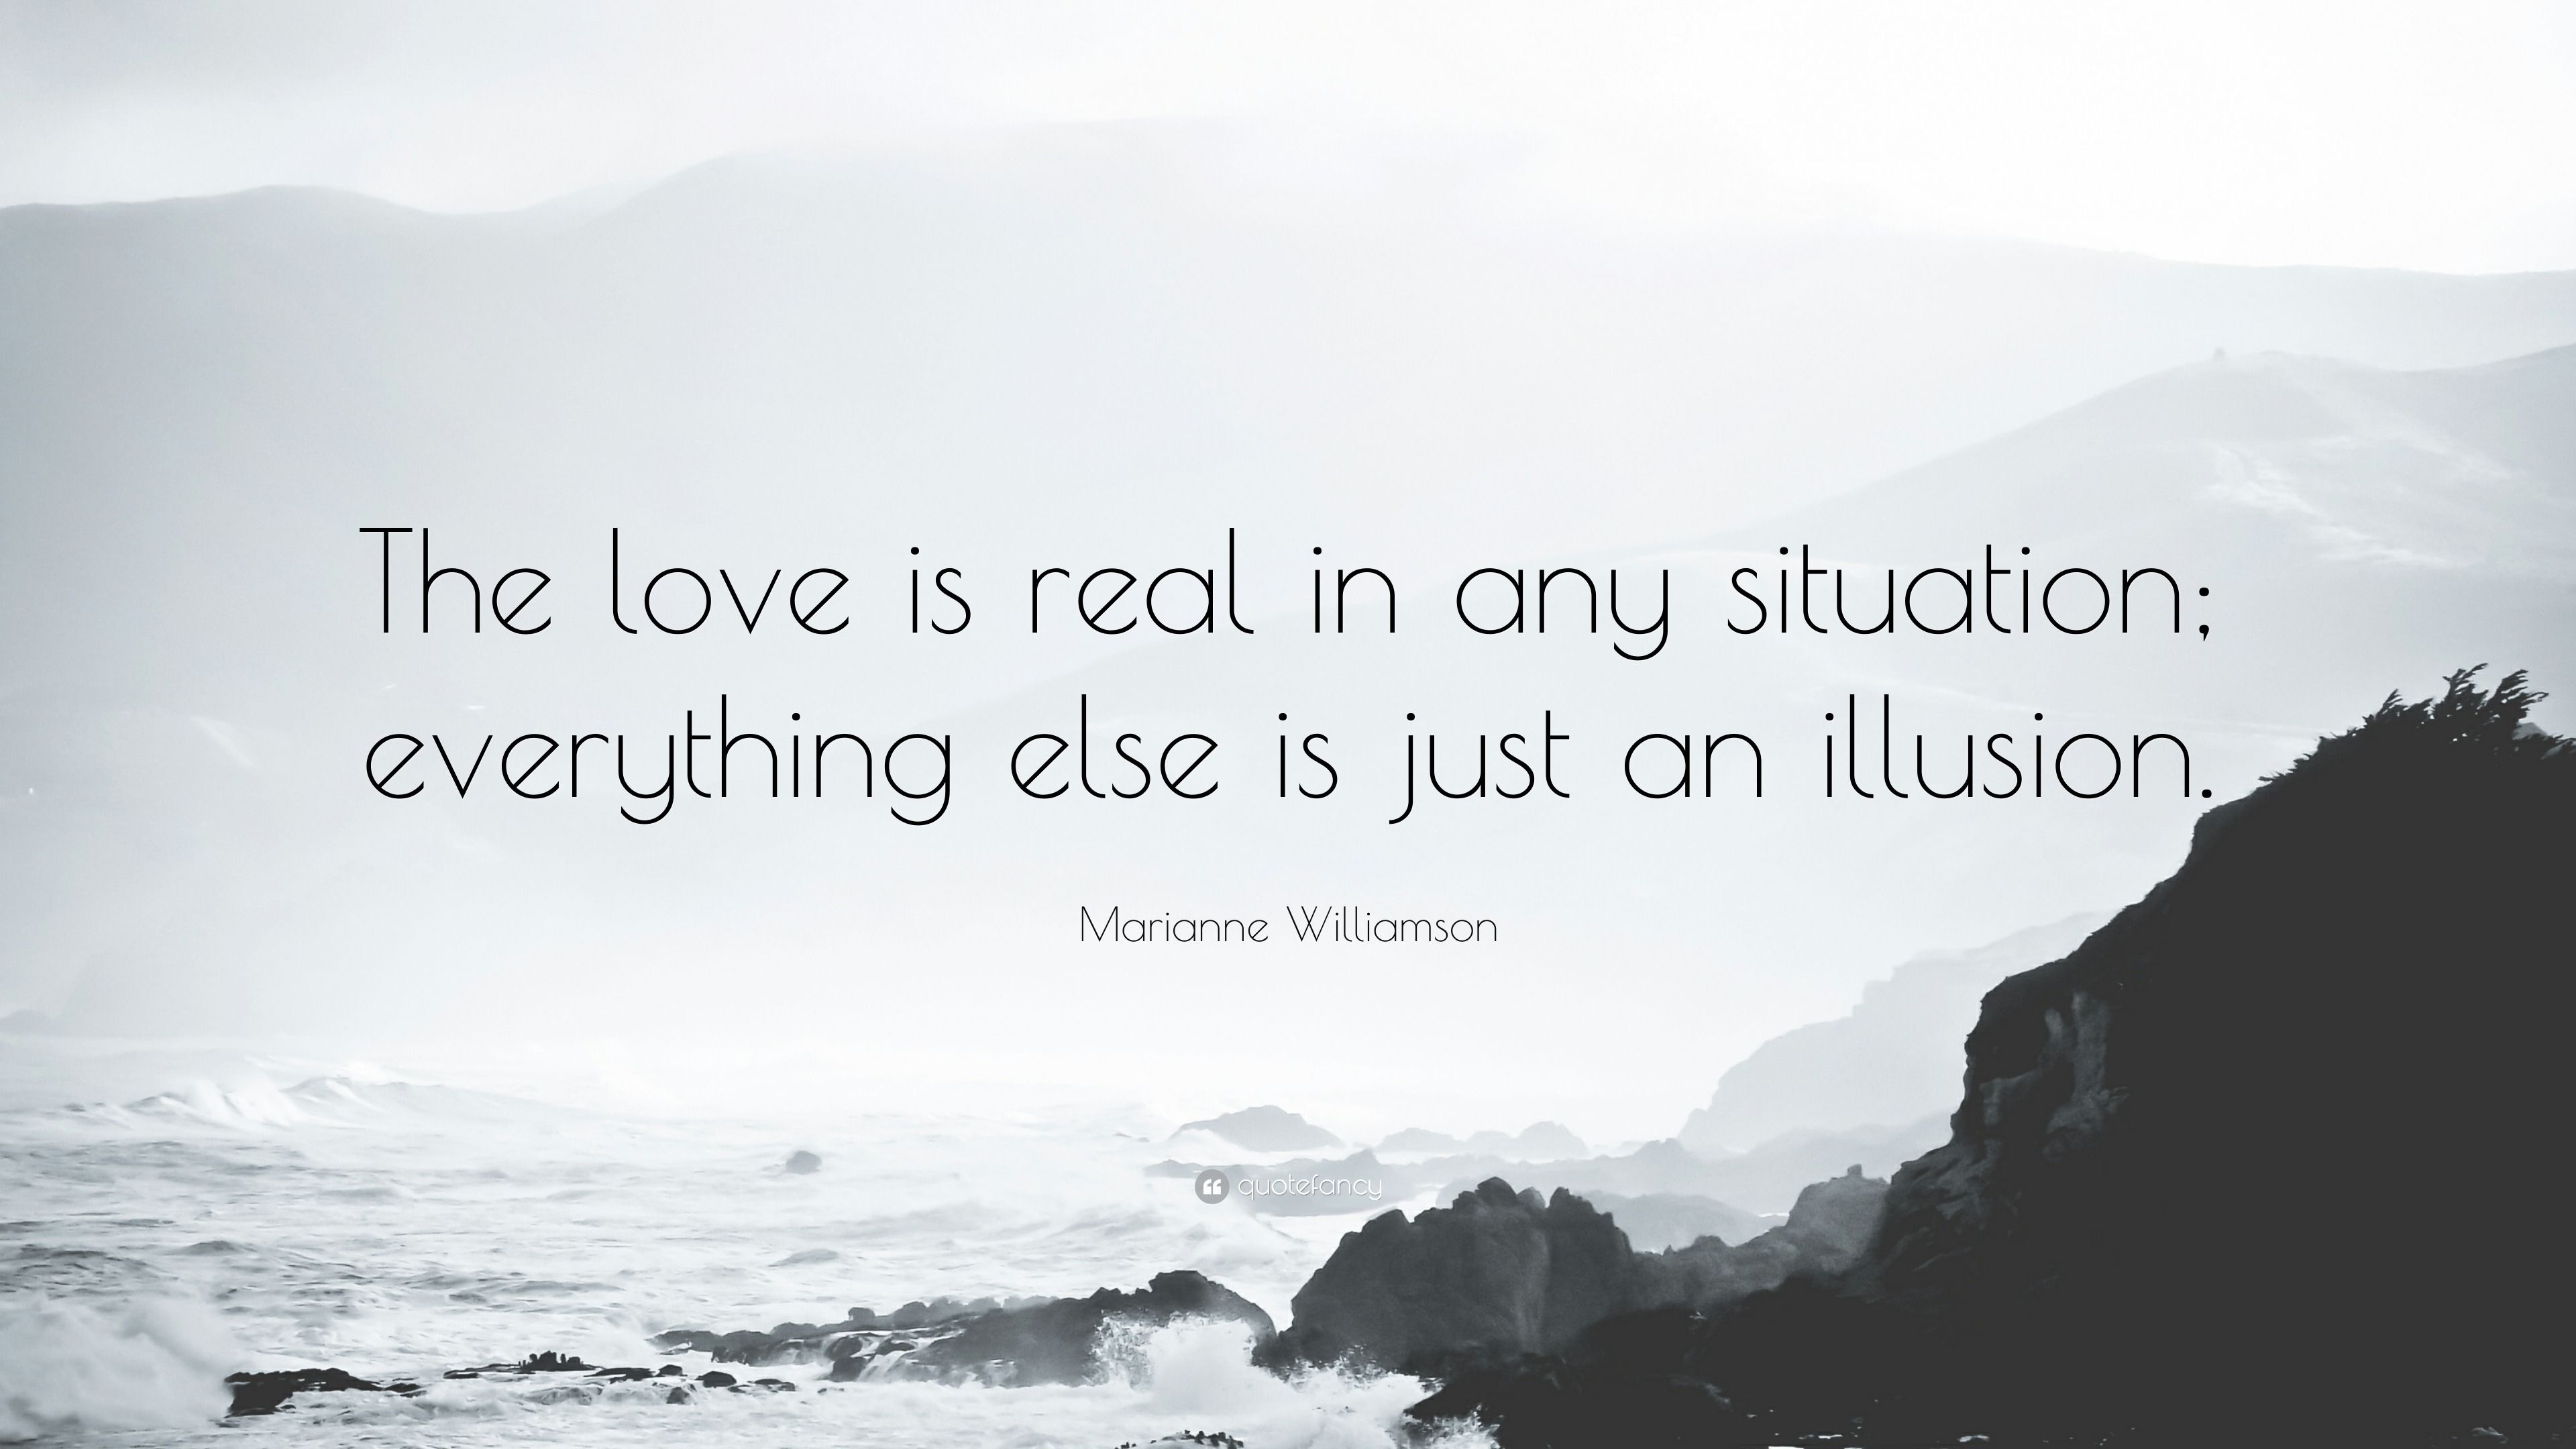 Marianne Williamson Quote: “The love is real in any situation; everything  else is just an illusion.”